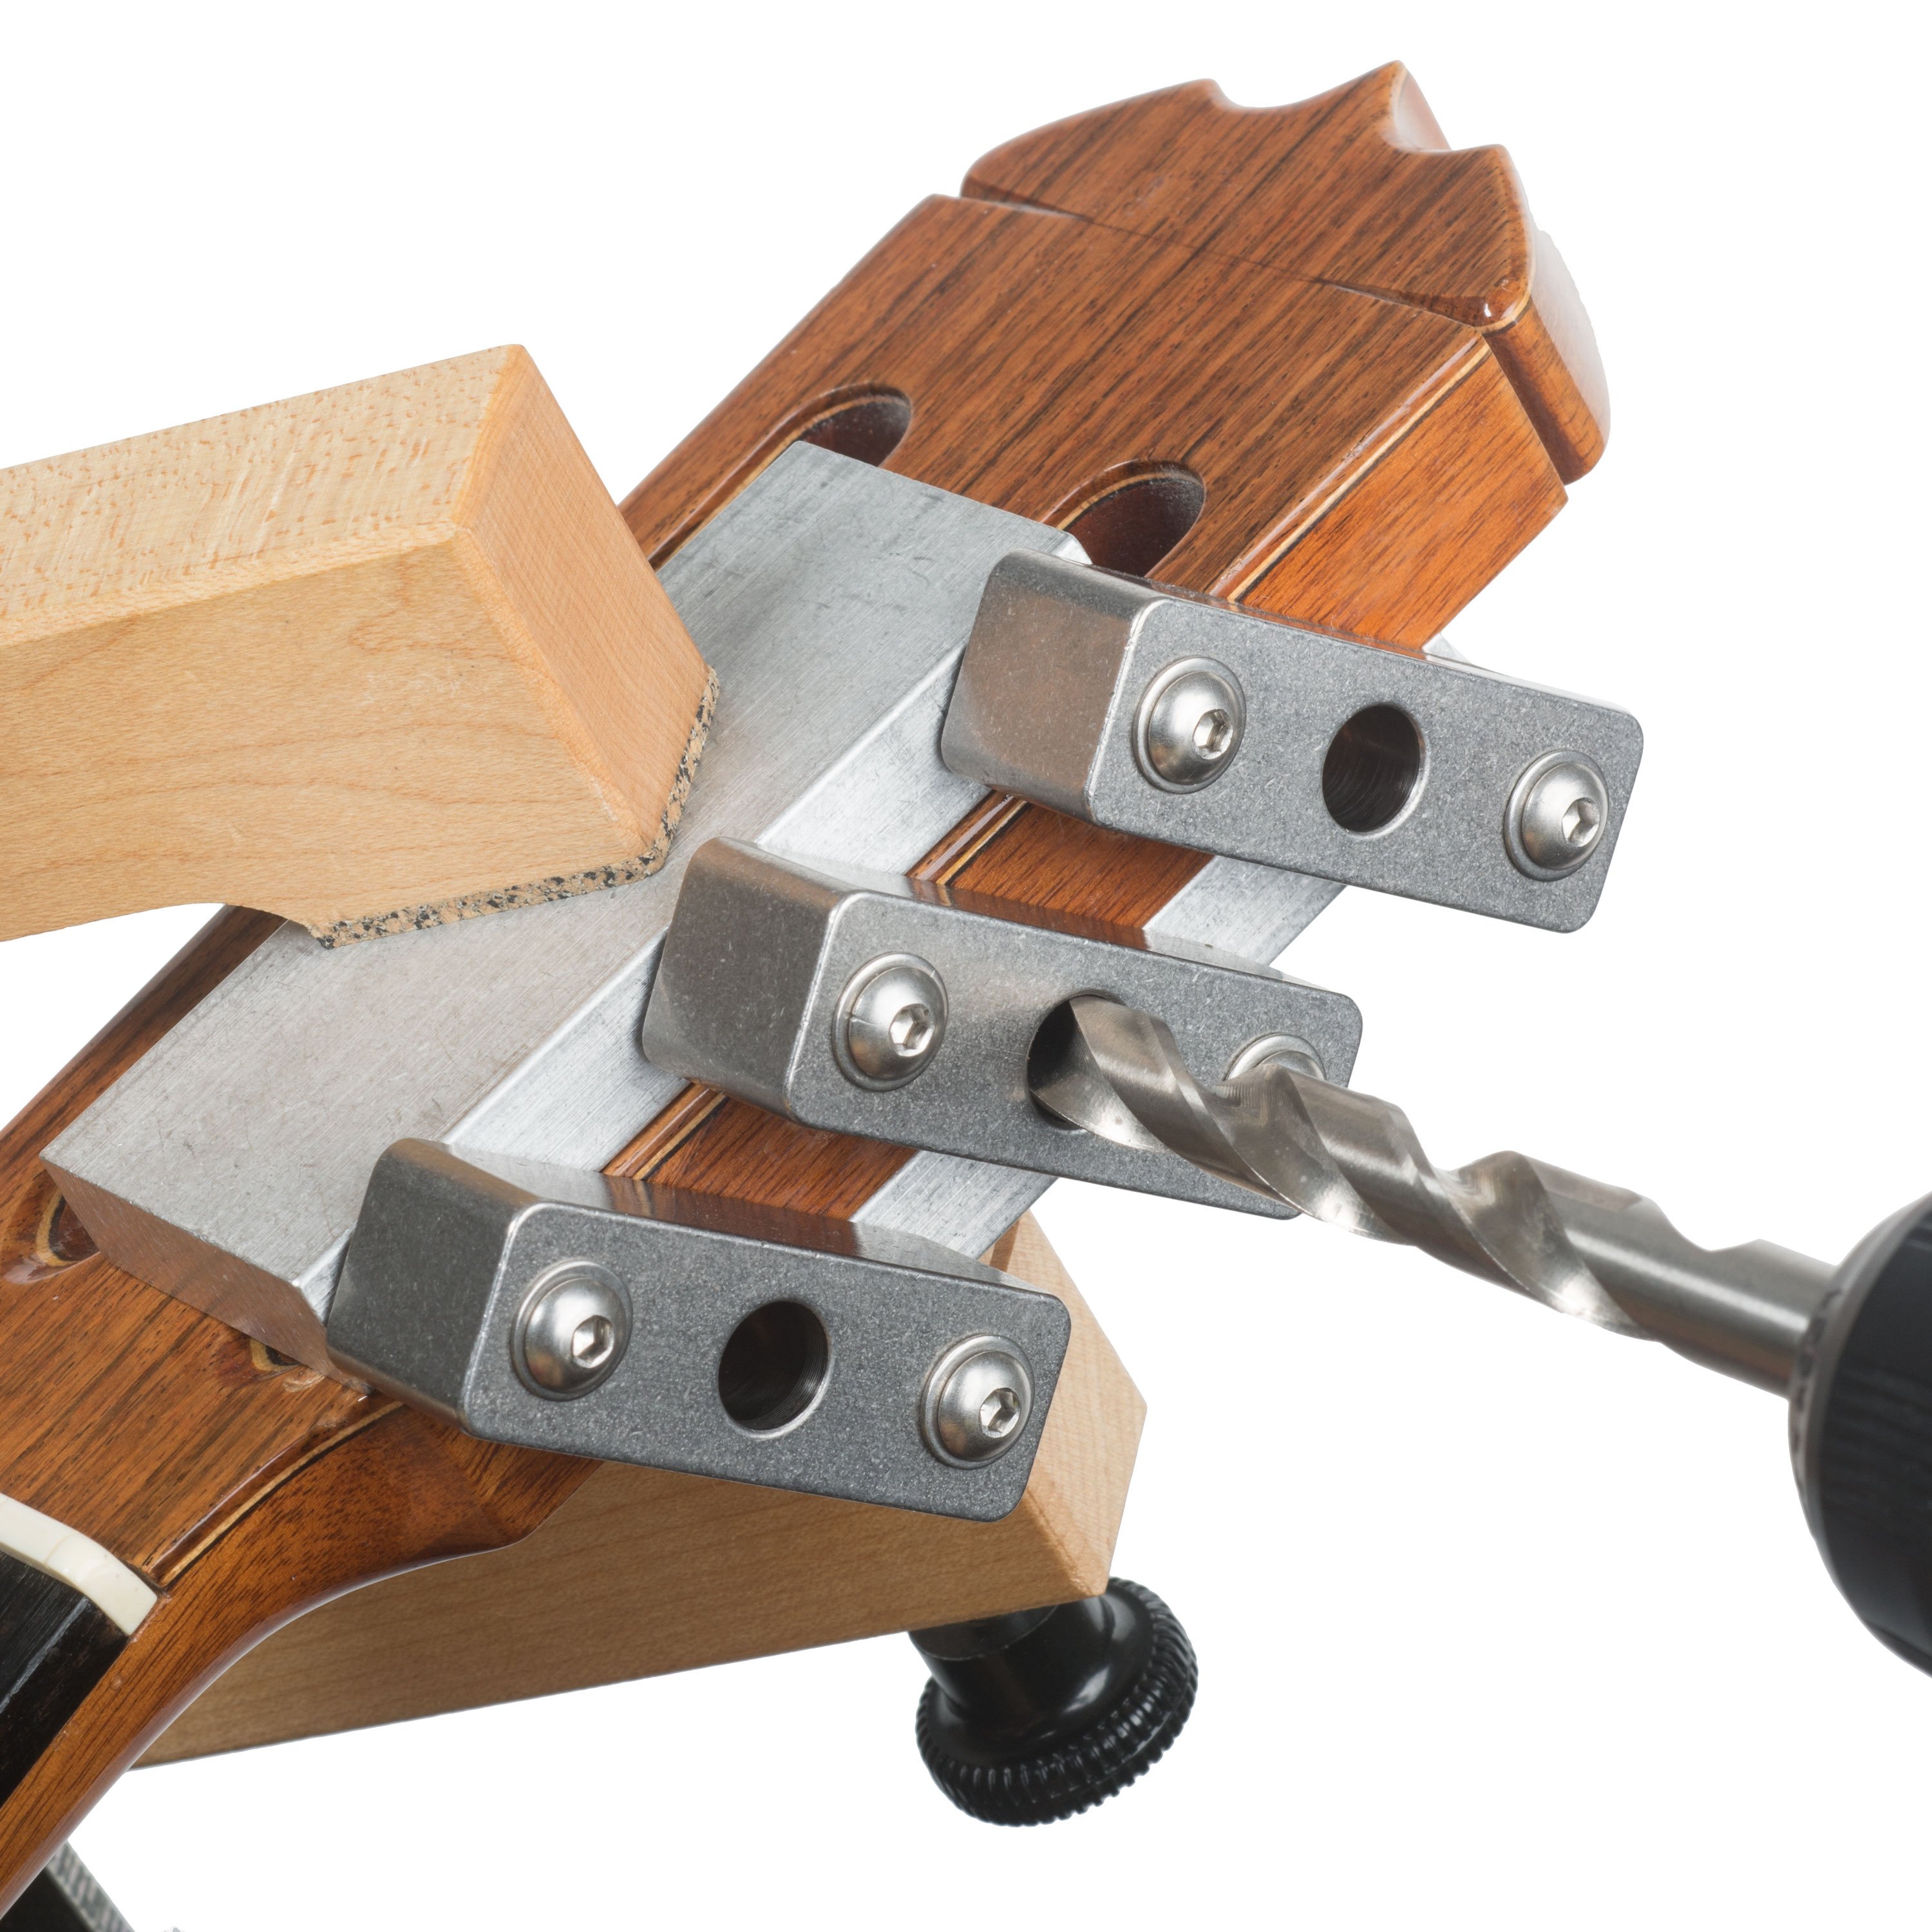 Guitar Tuner Drill Jig for Slotted Headstocks